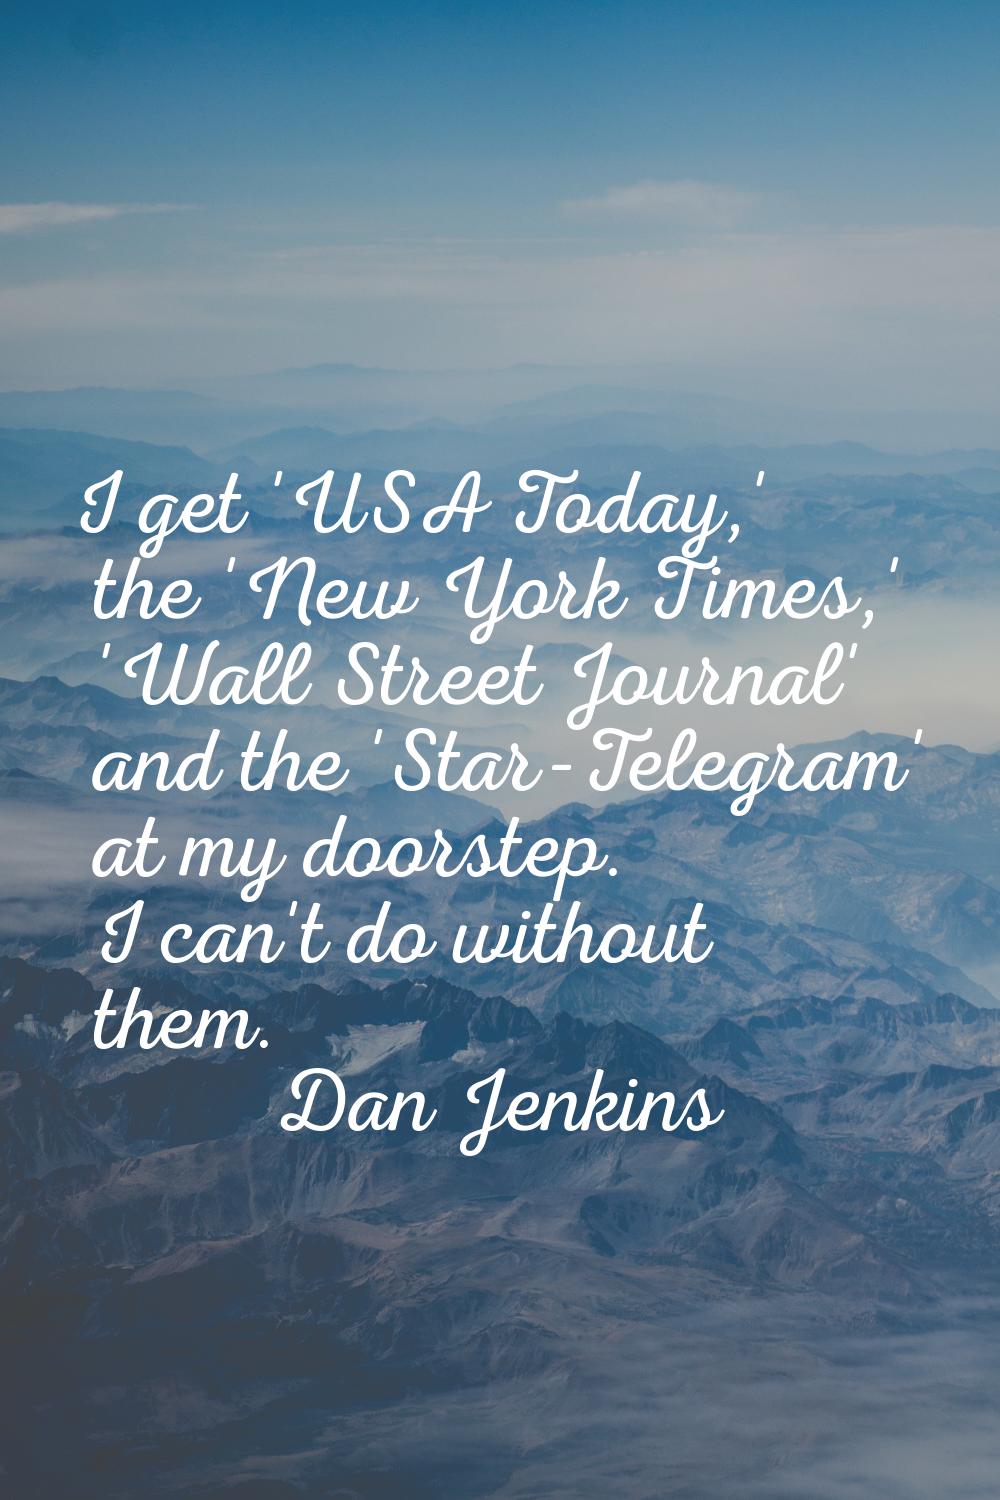 I get 'USA Today,' the 'New York Times,' 'Wall Street Journal' and the 'Star-Telegram' at my doorst